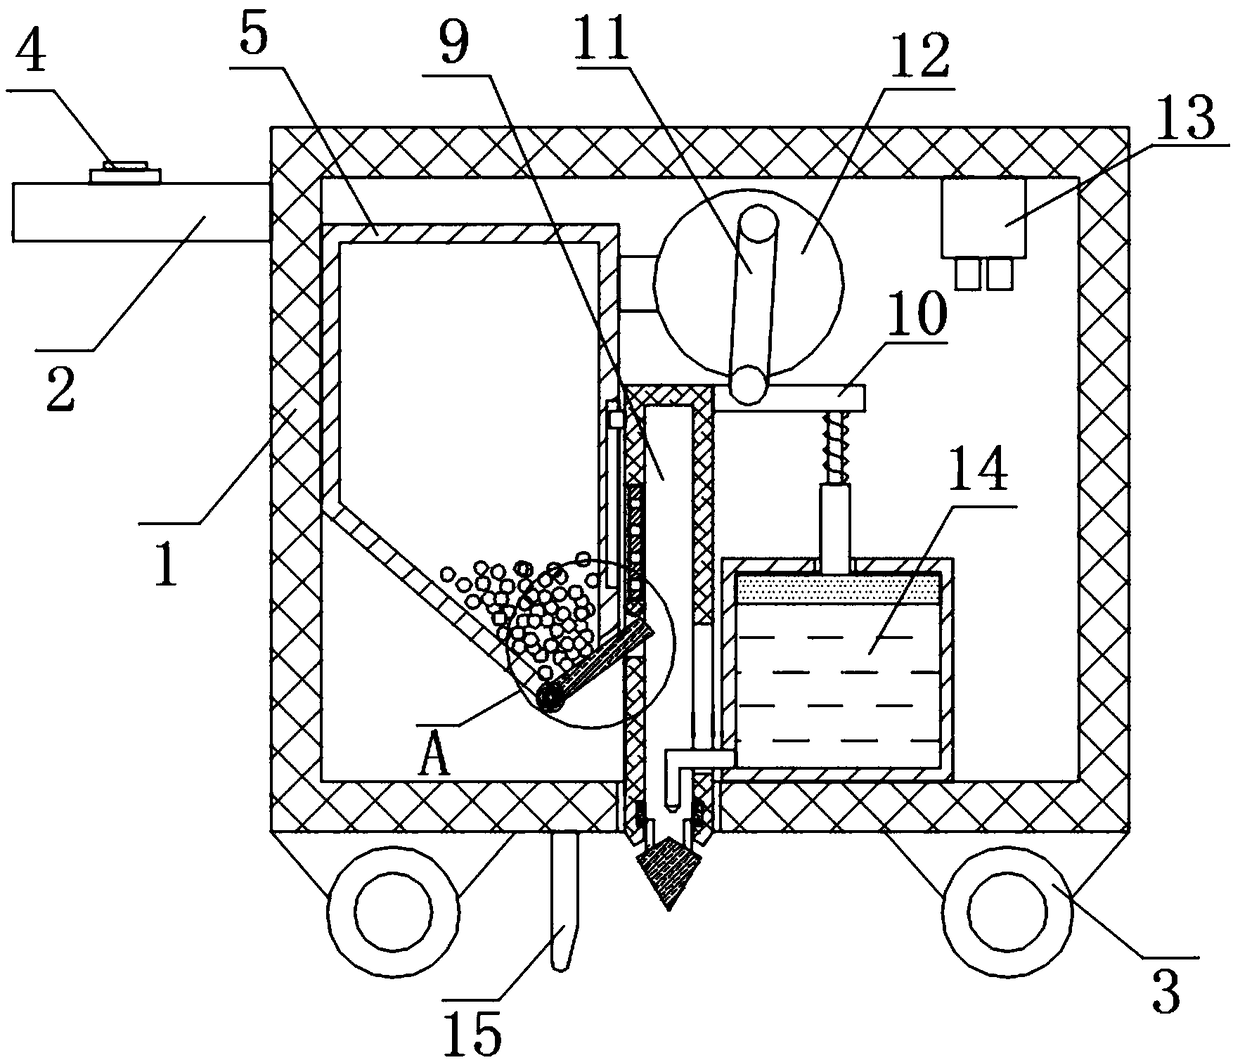 Efficient seeding device for planting snake gourd fruits